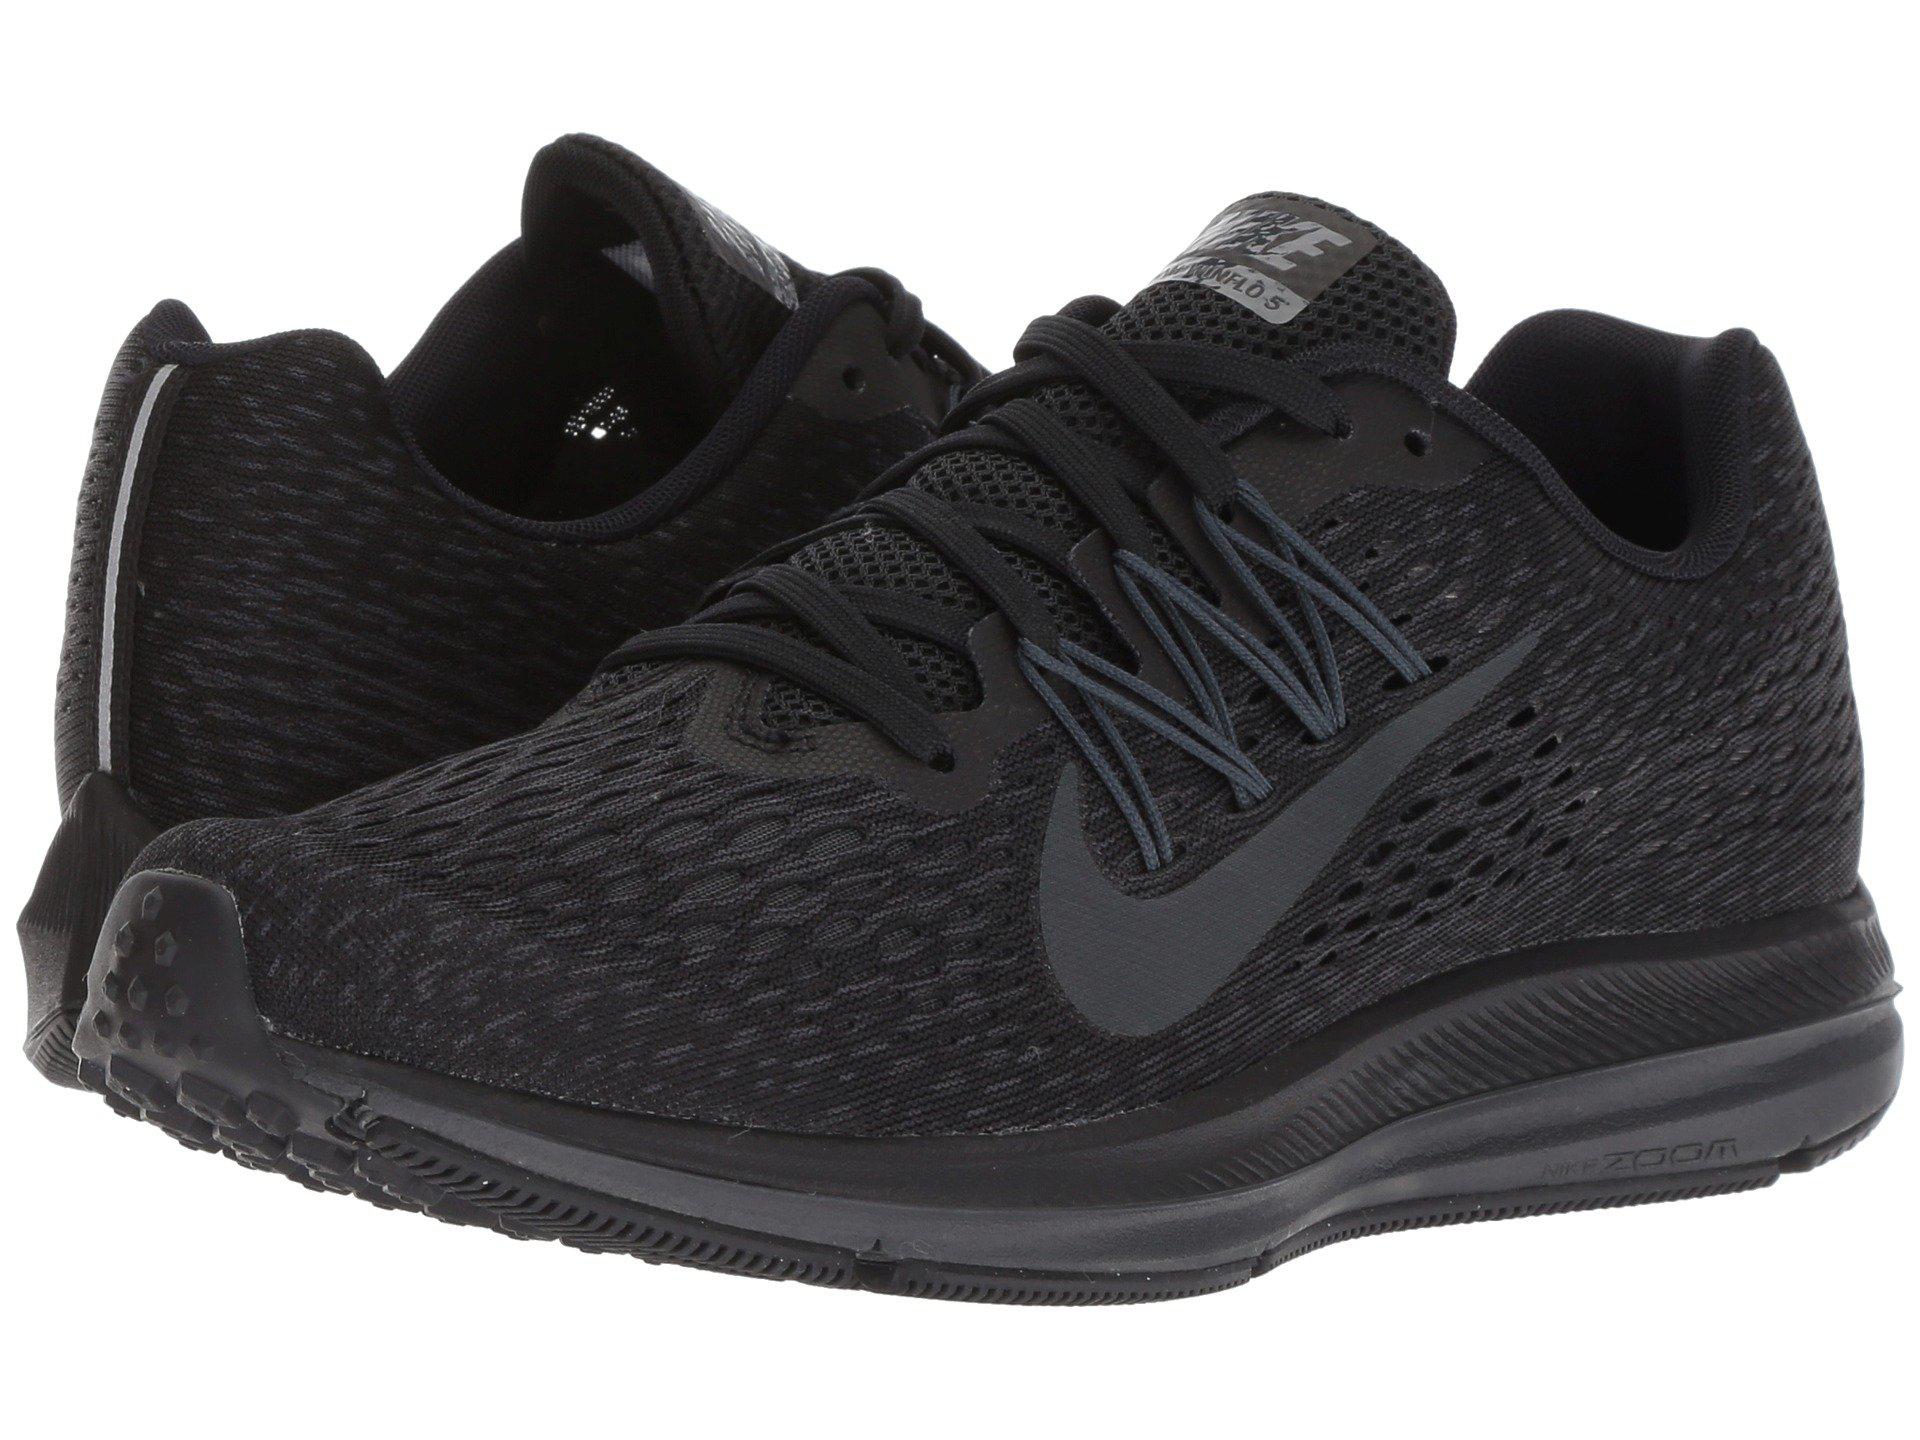 Nike Rubber Air Zoom Winflo 5 (black/anthracite) Running Shoes - Lyst